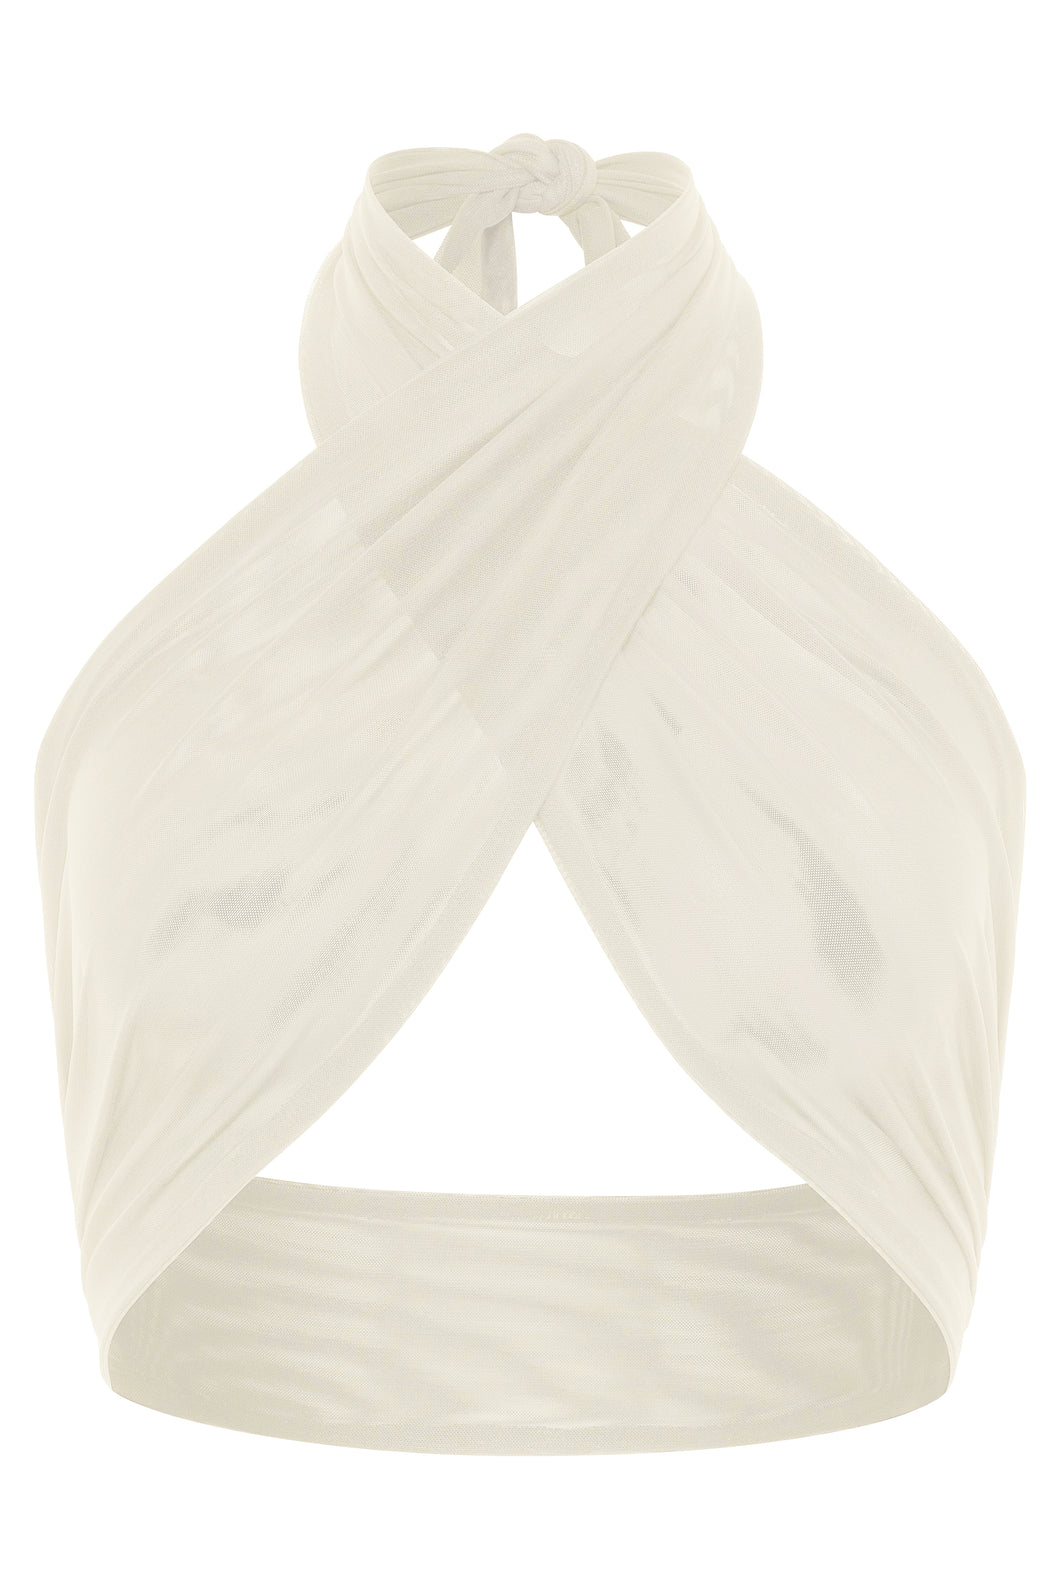 Flat image of the Anya Wrap Top in Ivory Sheer